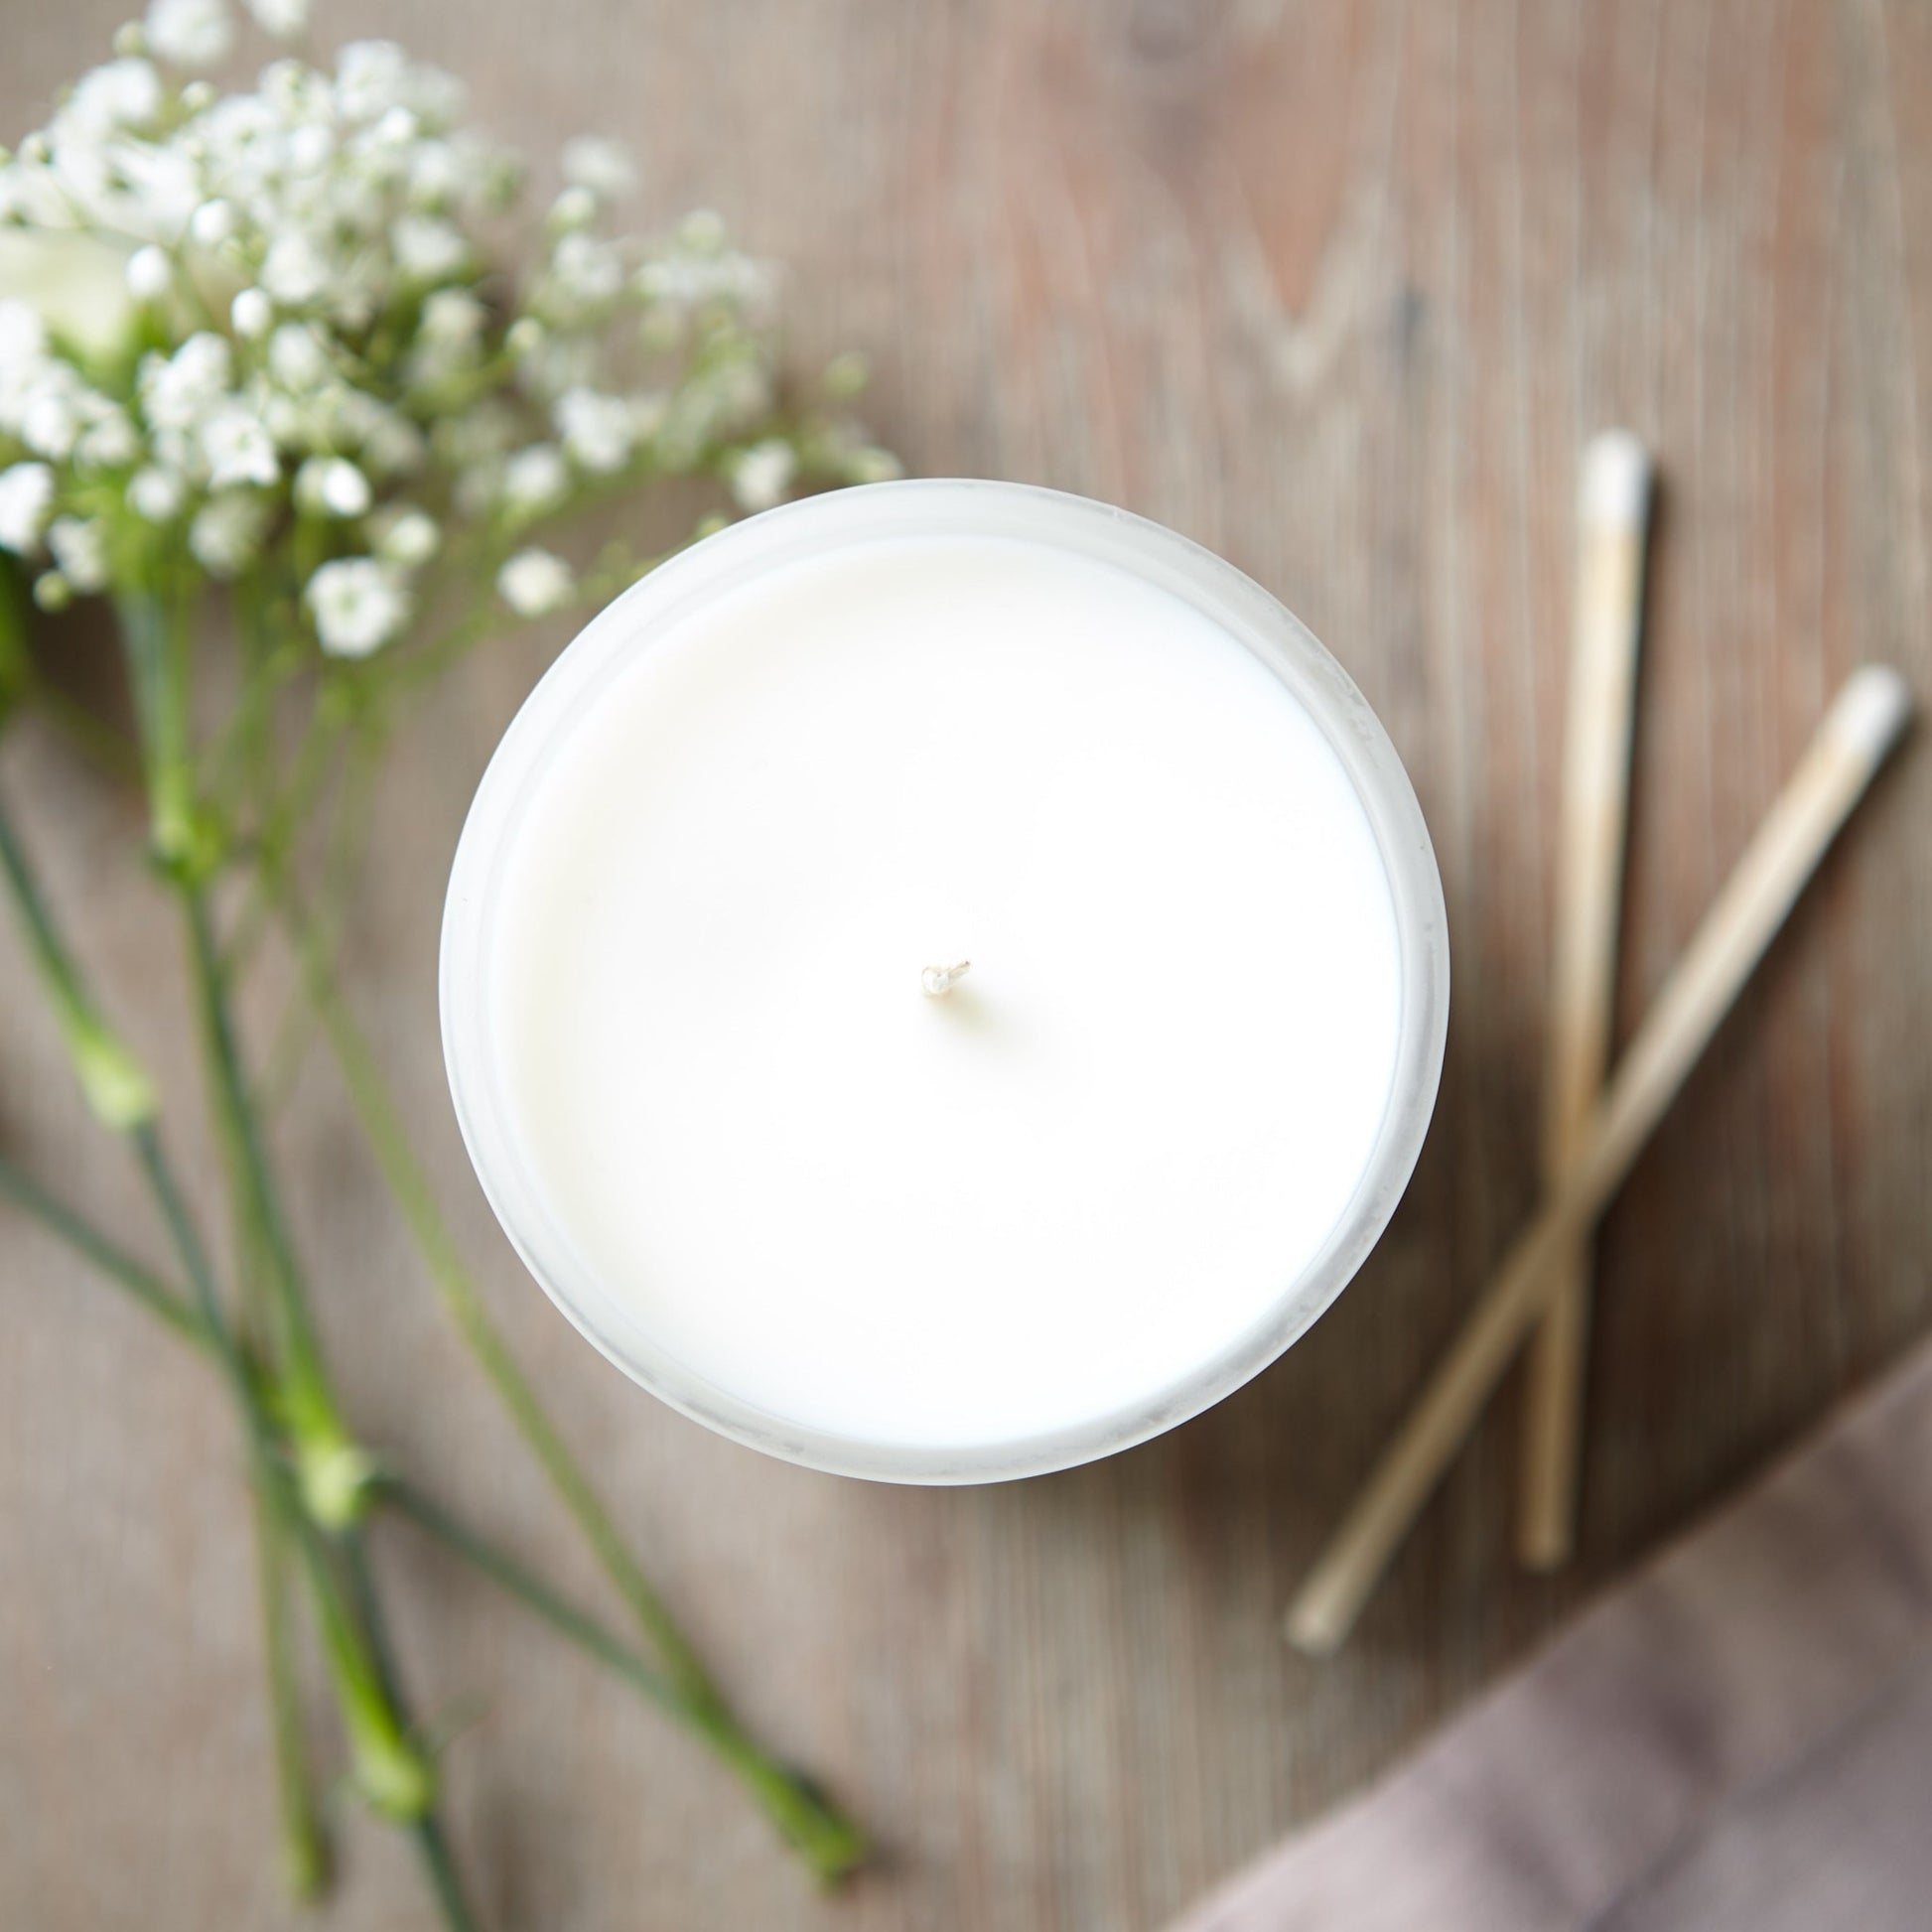 Maid of Honour Gift Botanical Candle - Kindred Fires